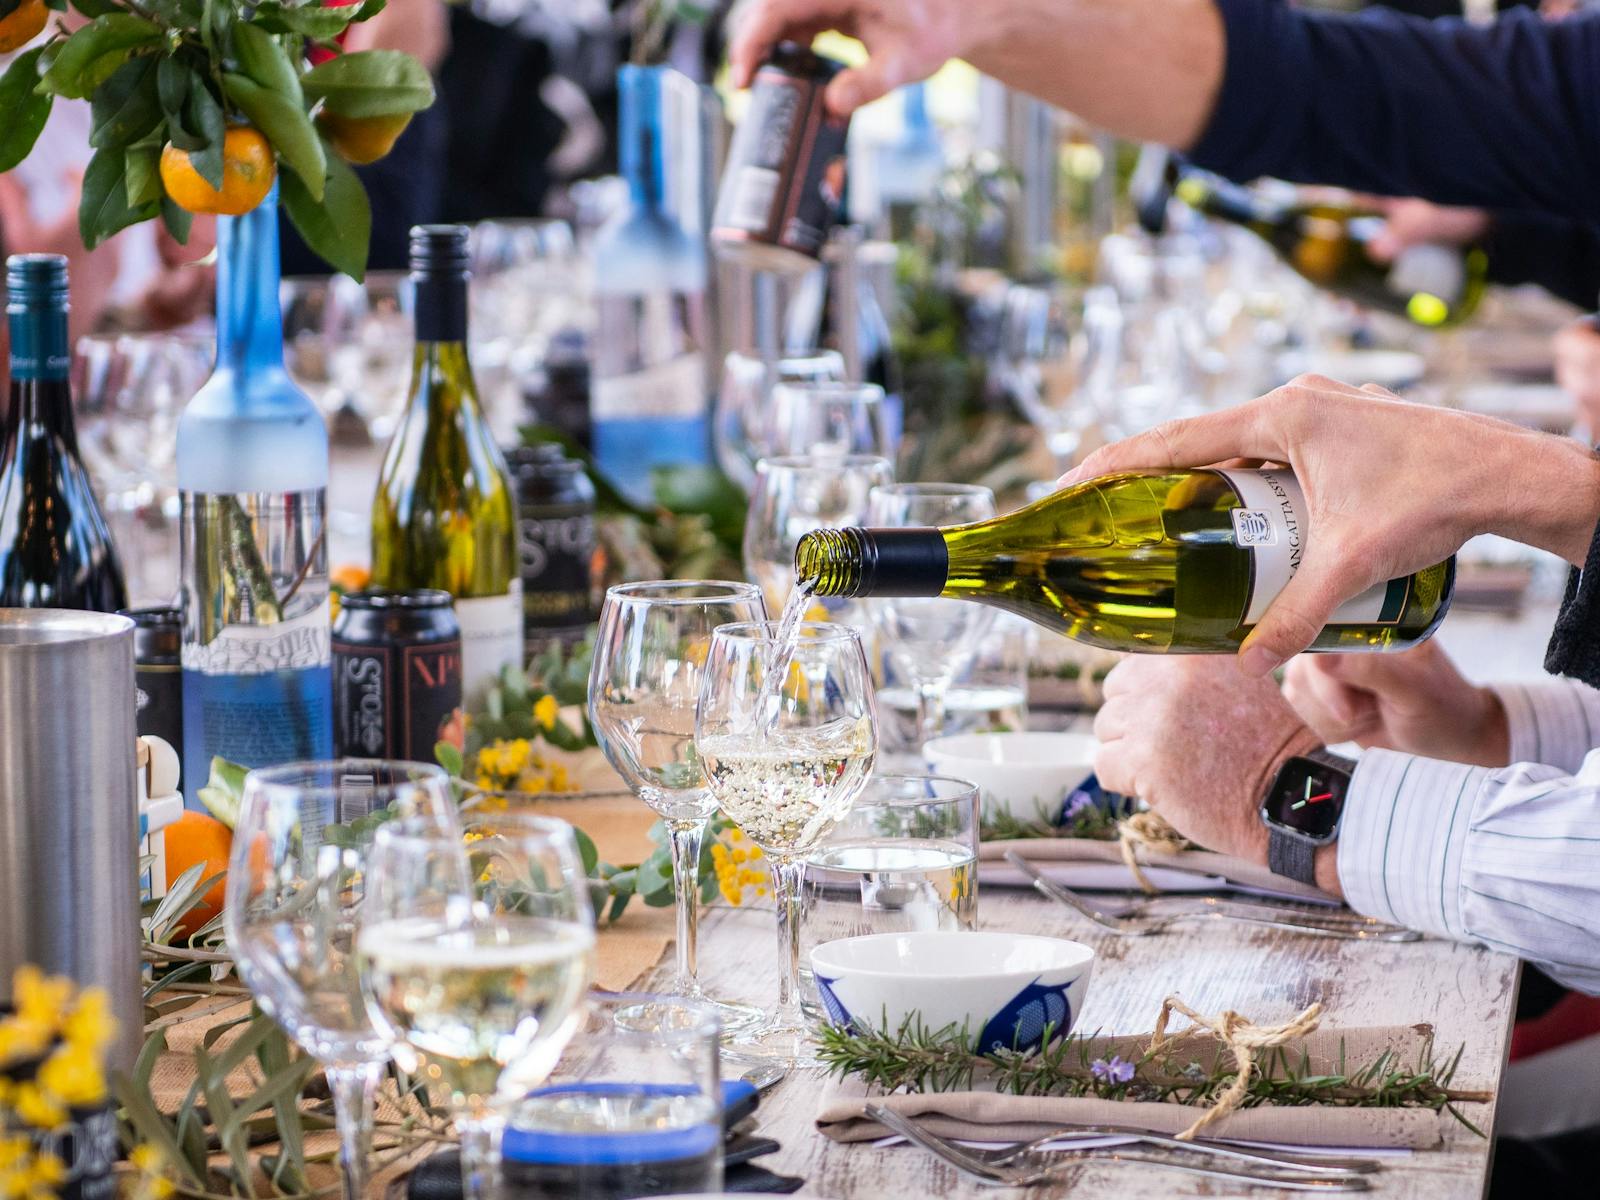 Wines, beers and Great Food; South Coast Food & Wine Festival